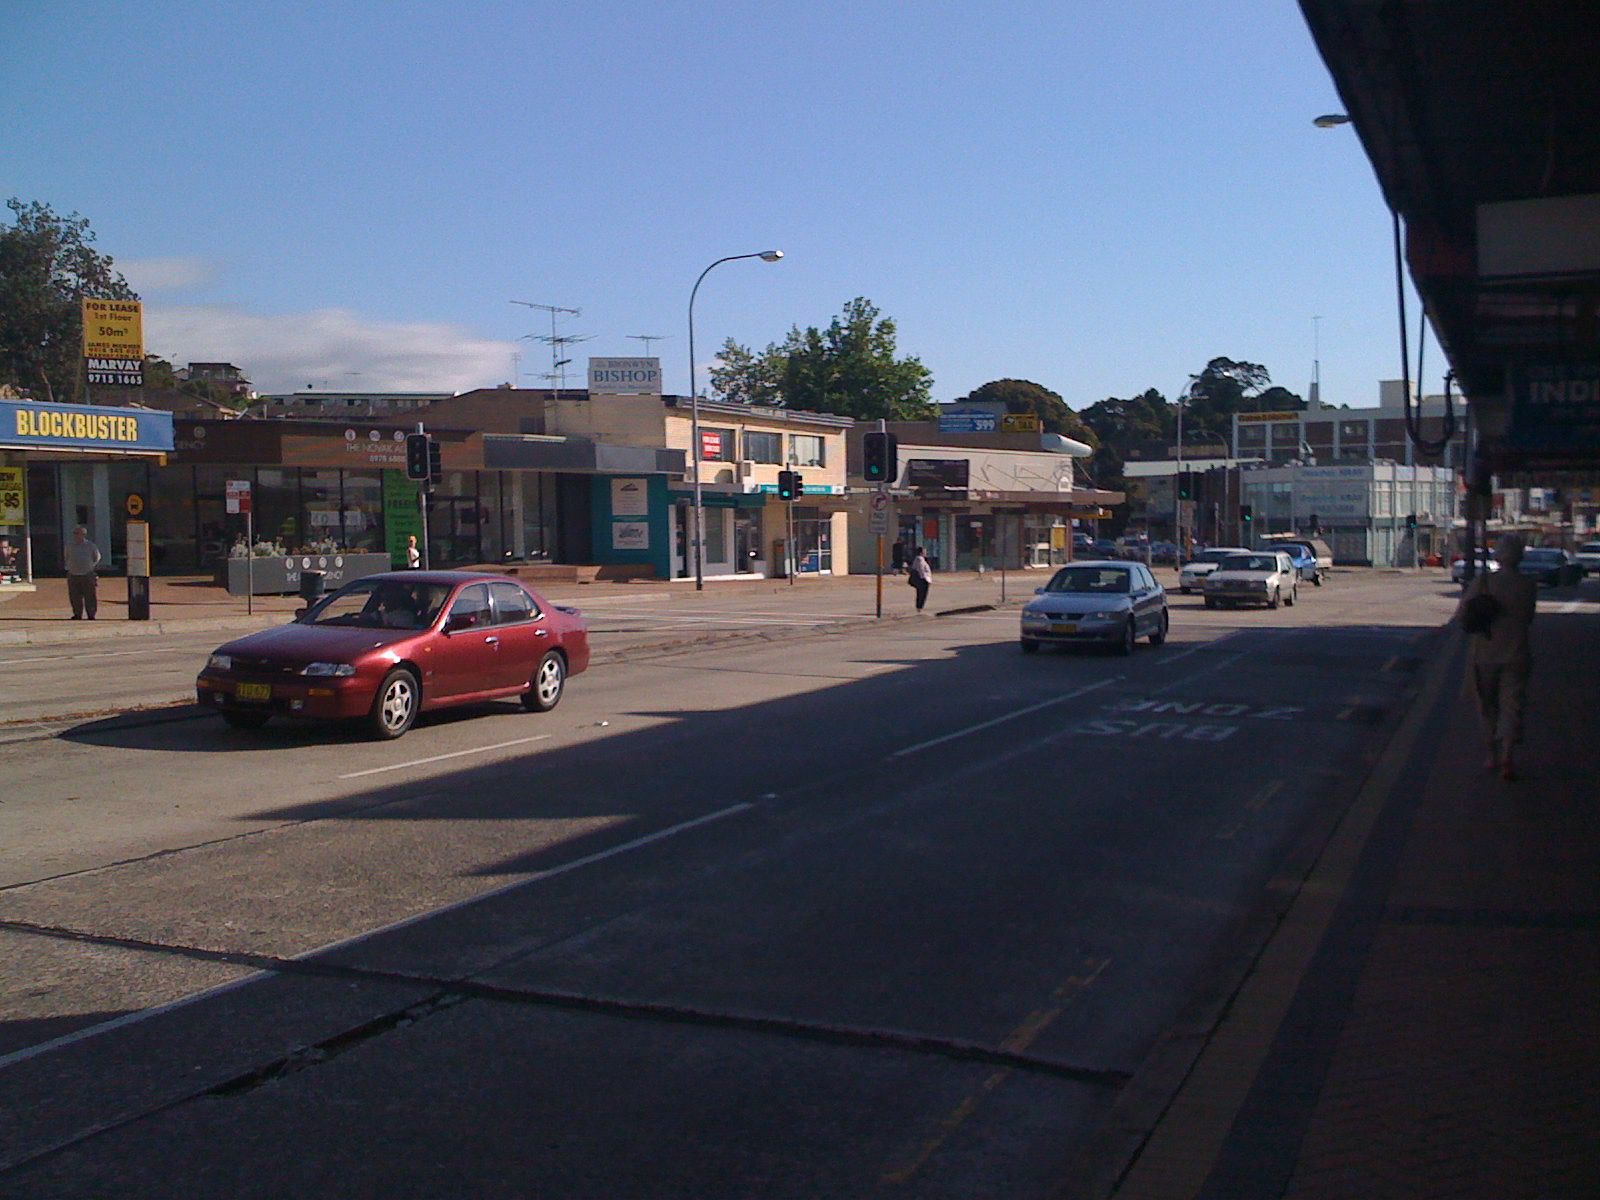 A photo of a six-lane road (three in each direction), with cars driving down it. The road is concrete rather than asphalt, and the buildings visible on the other side of the road are a bit run-down-looking.